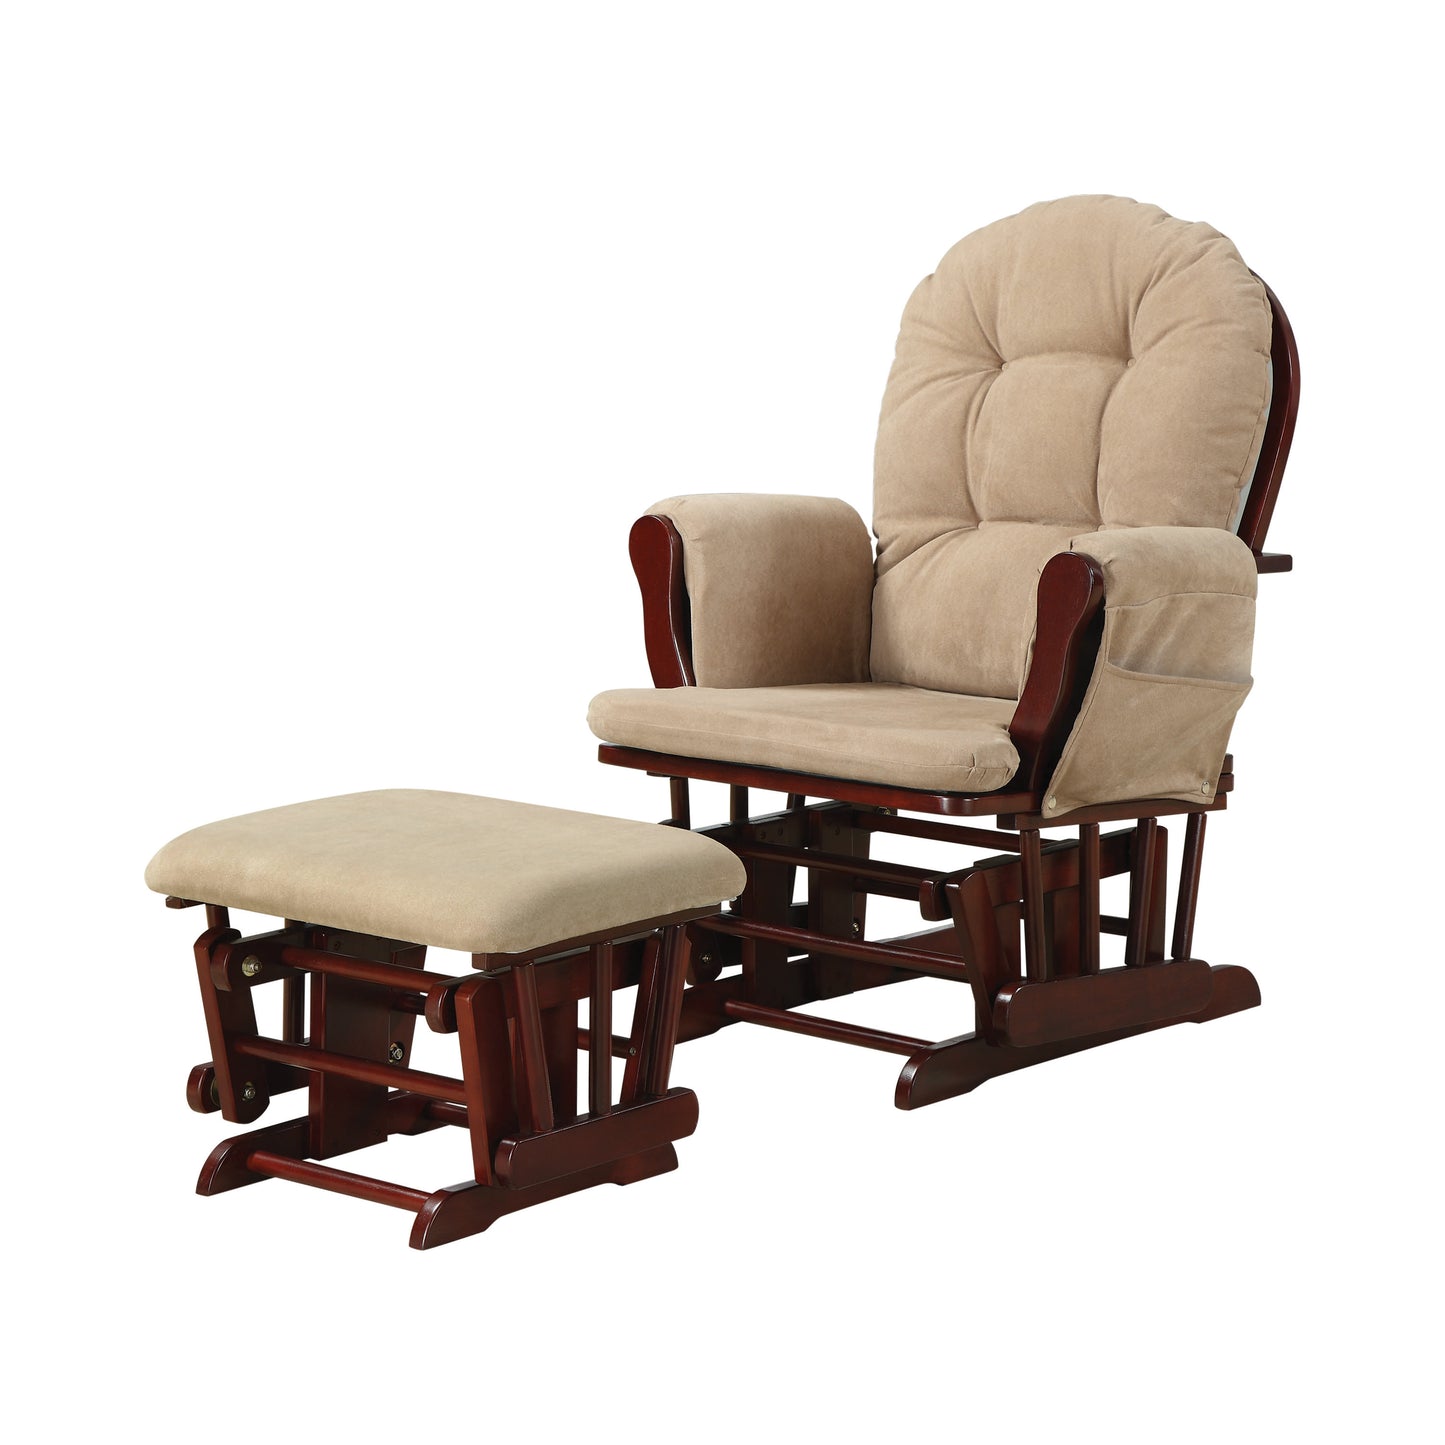 Upholstered Glider Rocker with Ottoman Tan